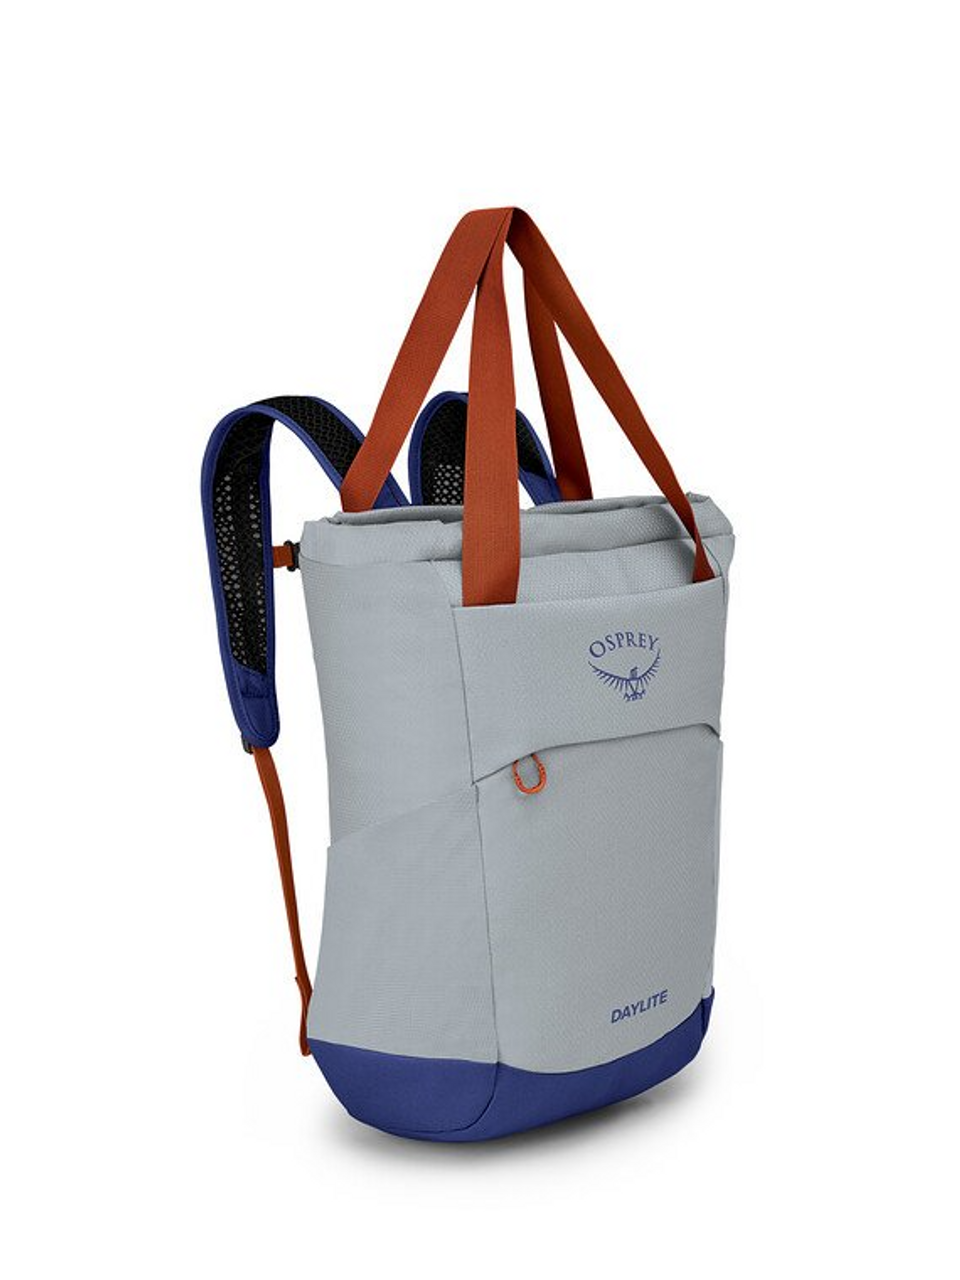 Daylite Tote Pack - Silver Lining/Blueberry - Ramsey Outdoor